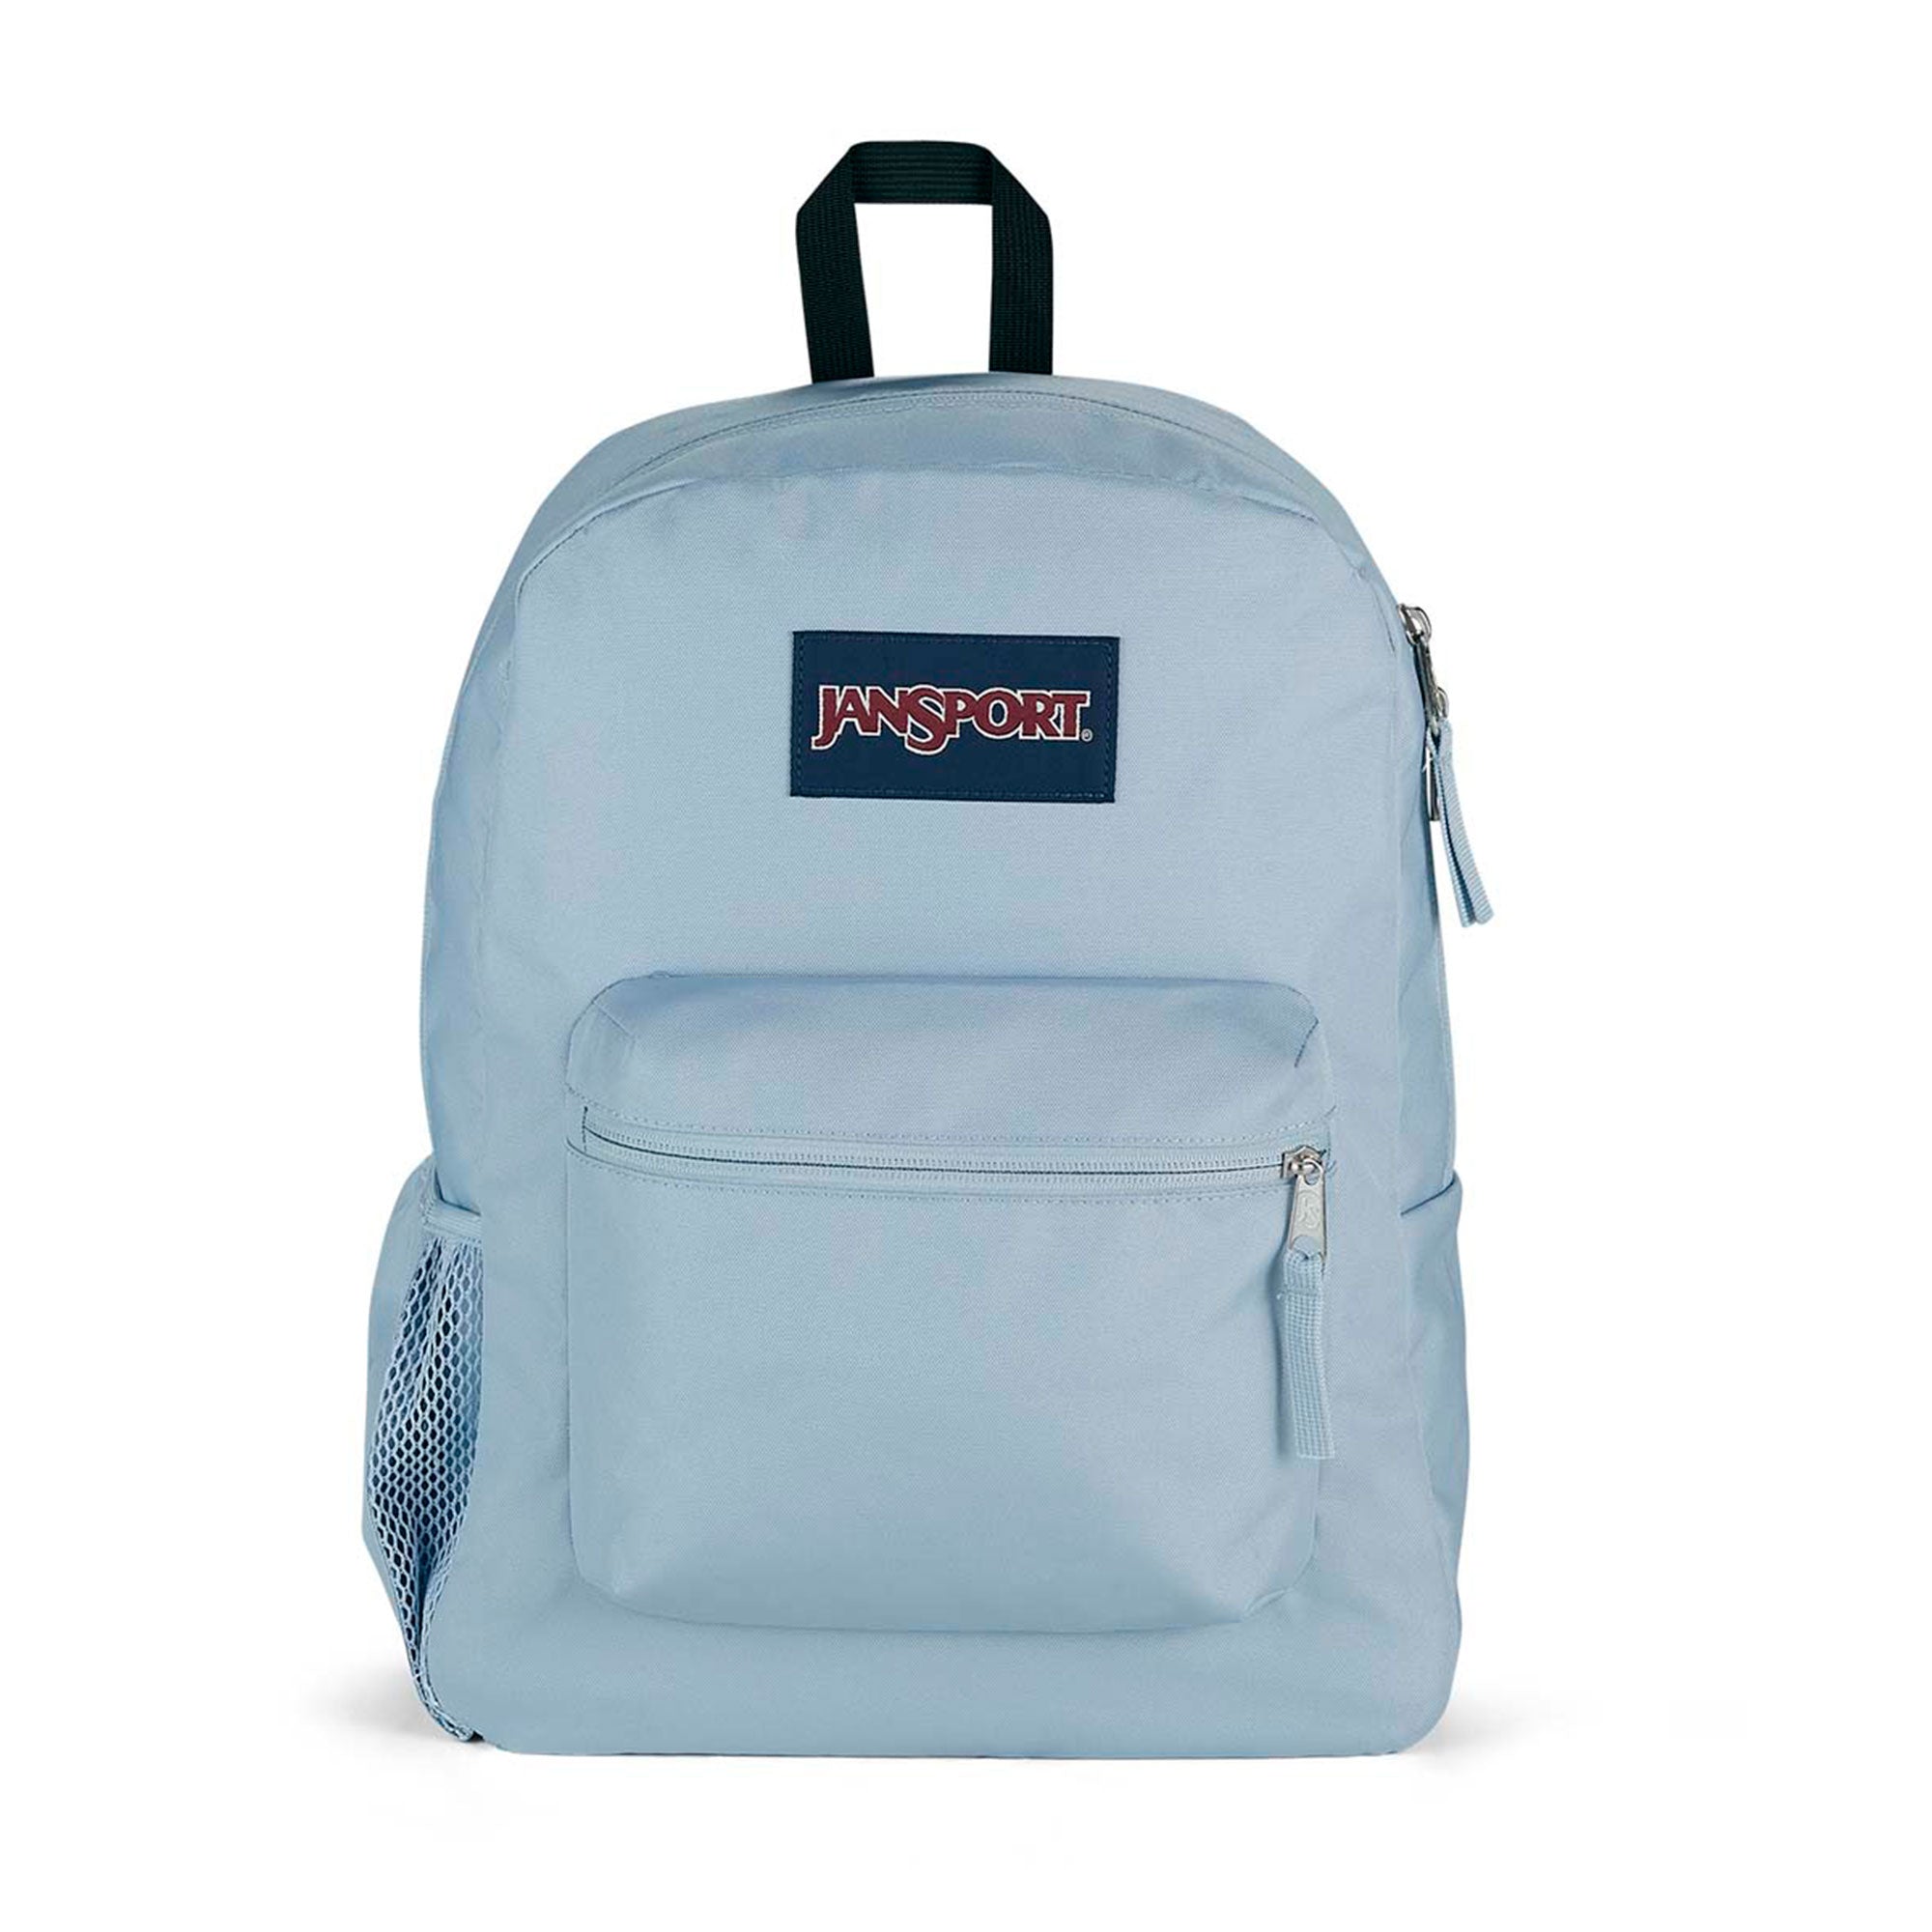 ColorPAQ Denim Red & Neon Blue Color-Change Backpack